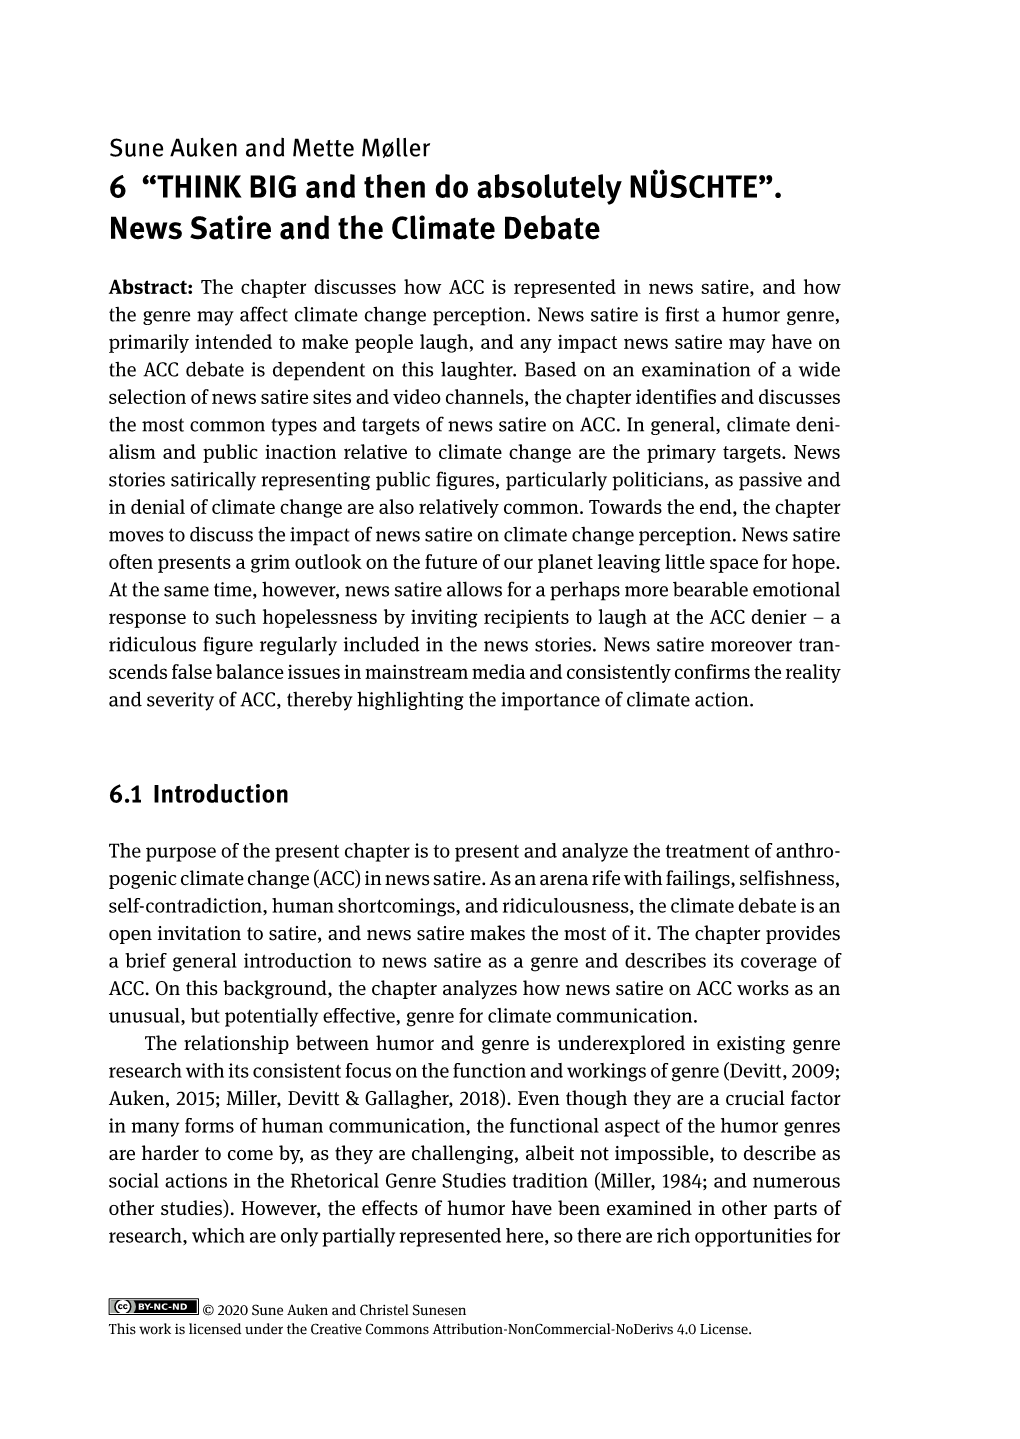 News Satire and the Climate Debate